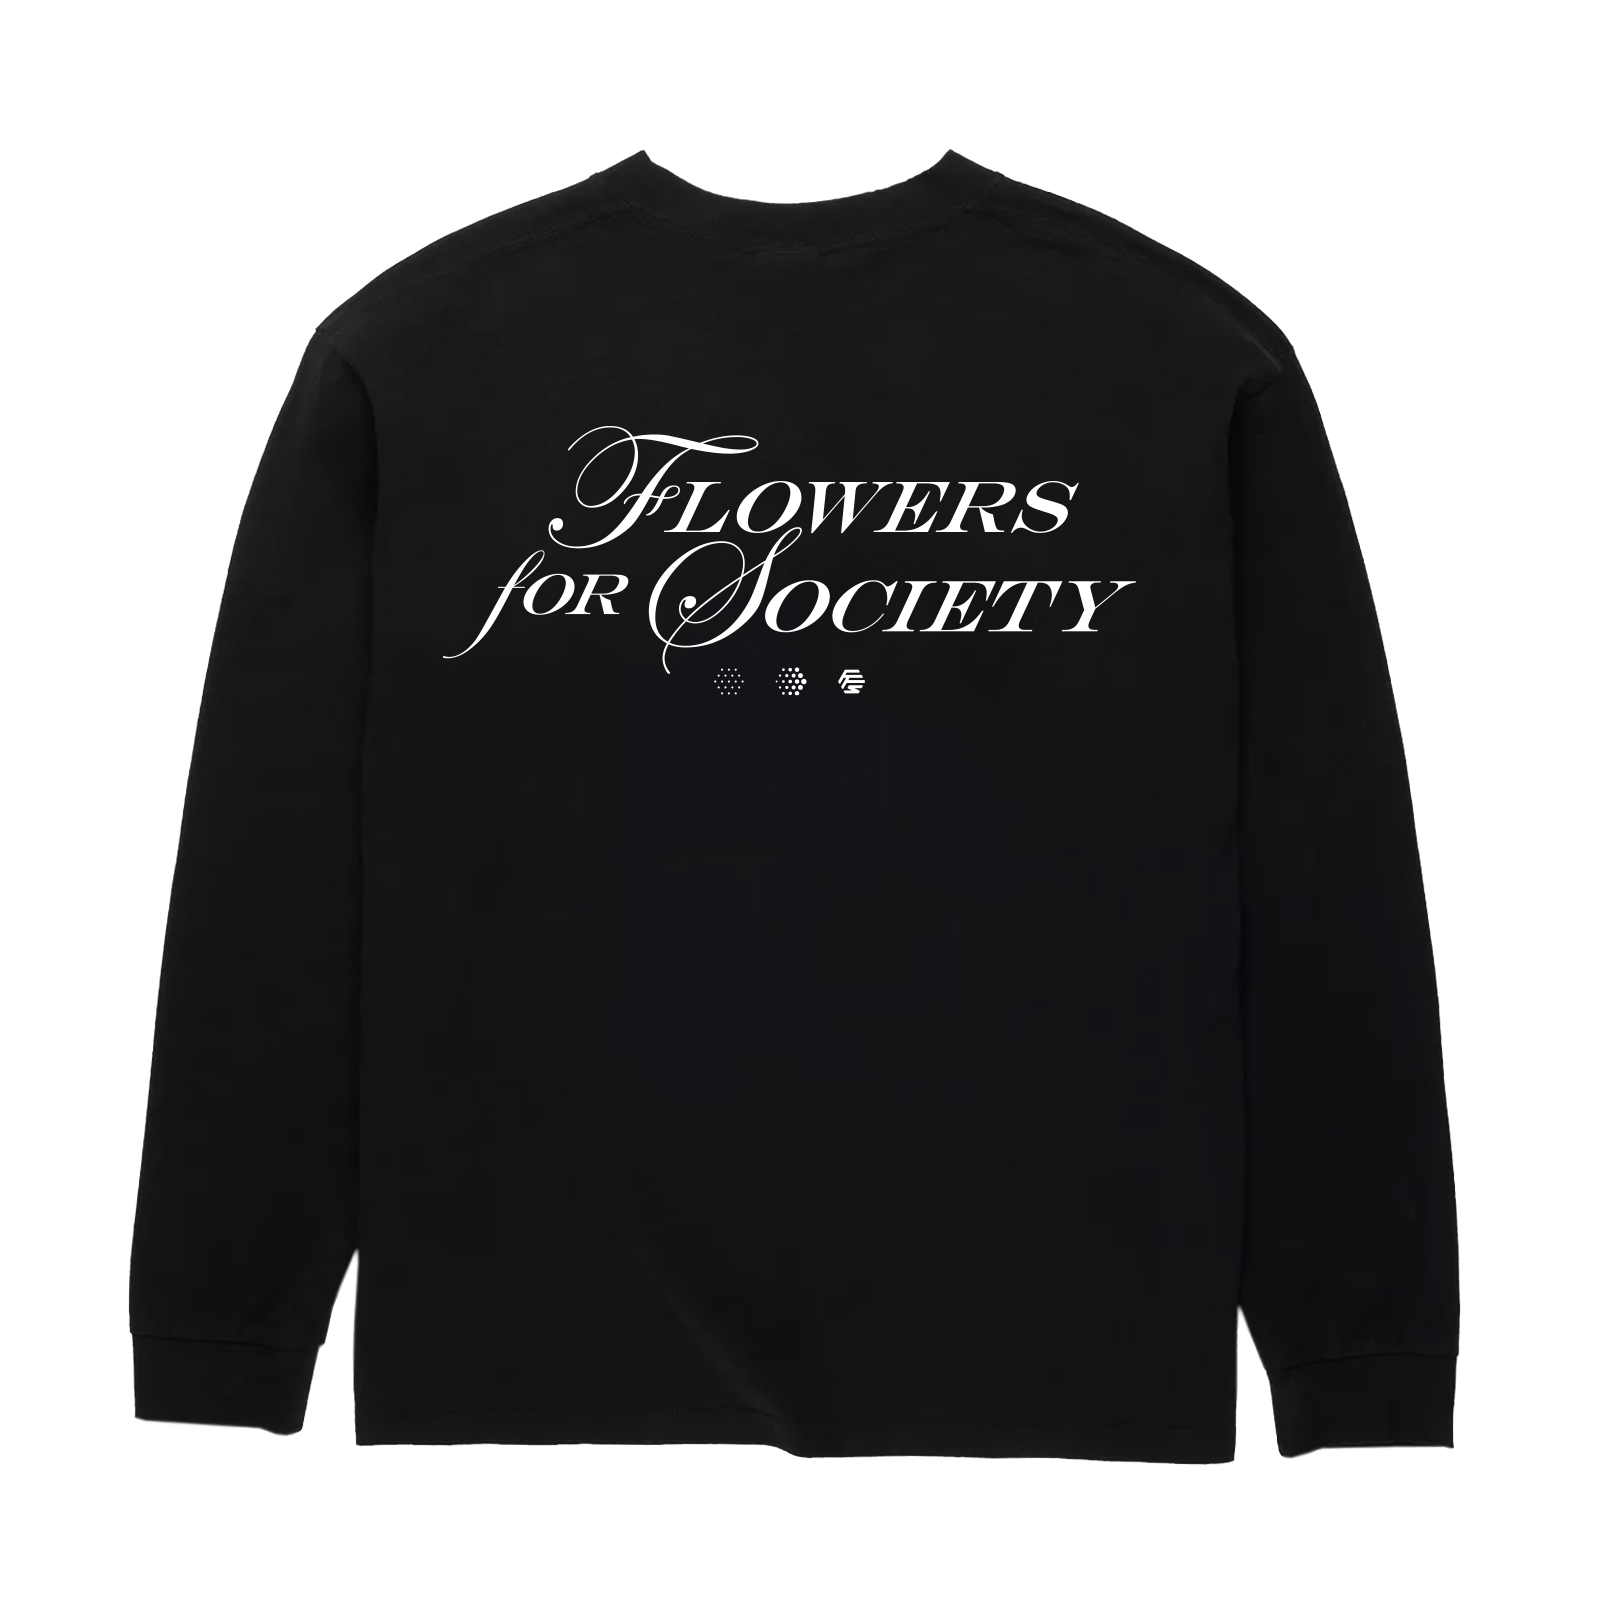 Flowers for Society bouquet longsleeve T Shirt black back view